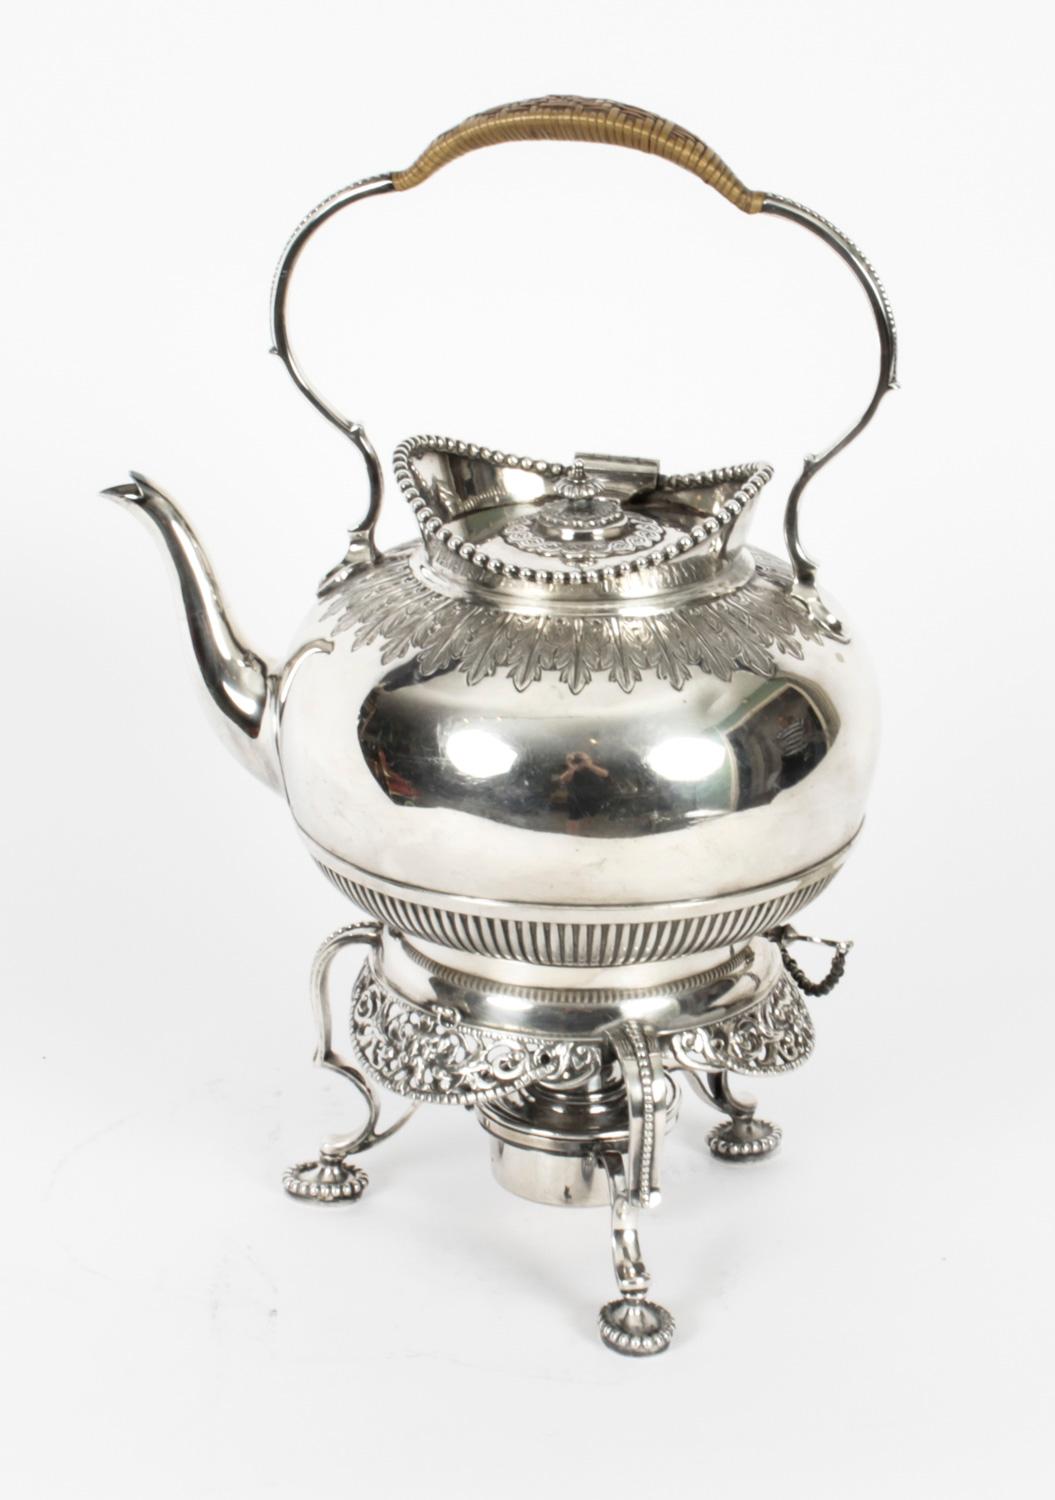 This is a stylish English antique silver plated spirit kettle on stand by the renowned silversmith Elkington & Co with the date mark for 1845.

This superb kettle has a circular shaped body with an elegant handle and a Louis spout.
 
It has a